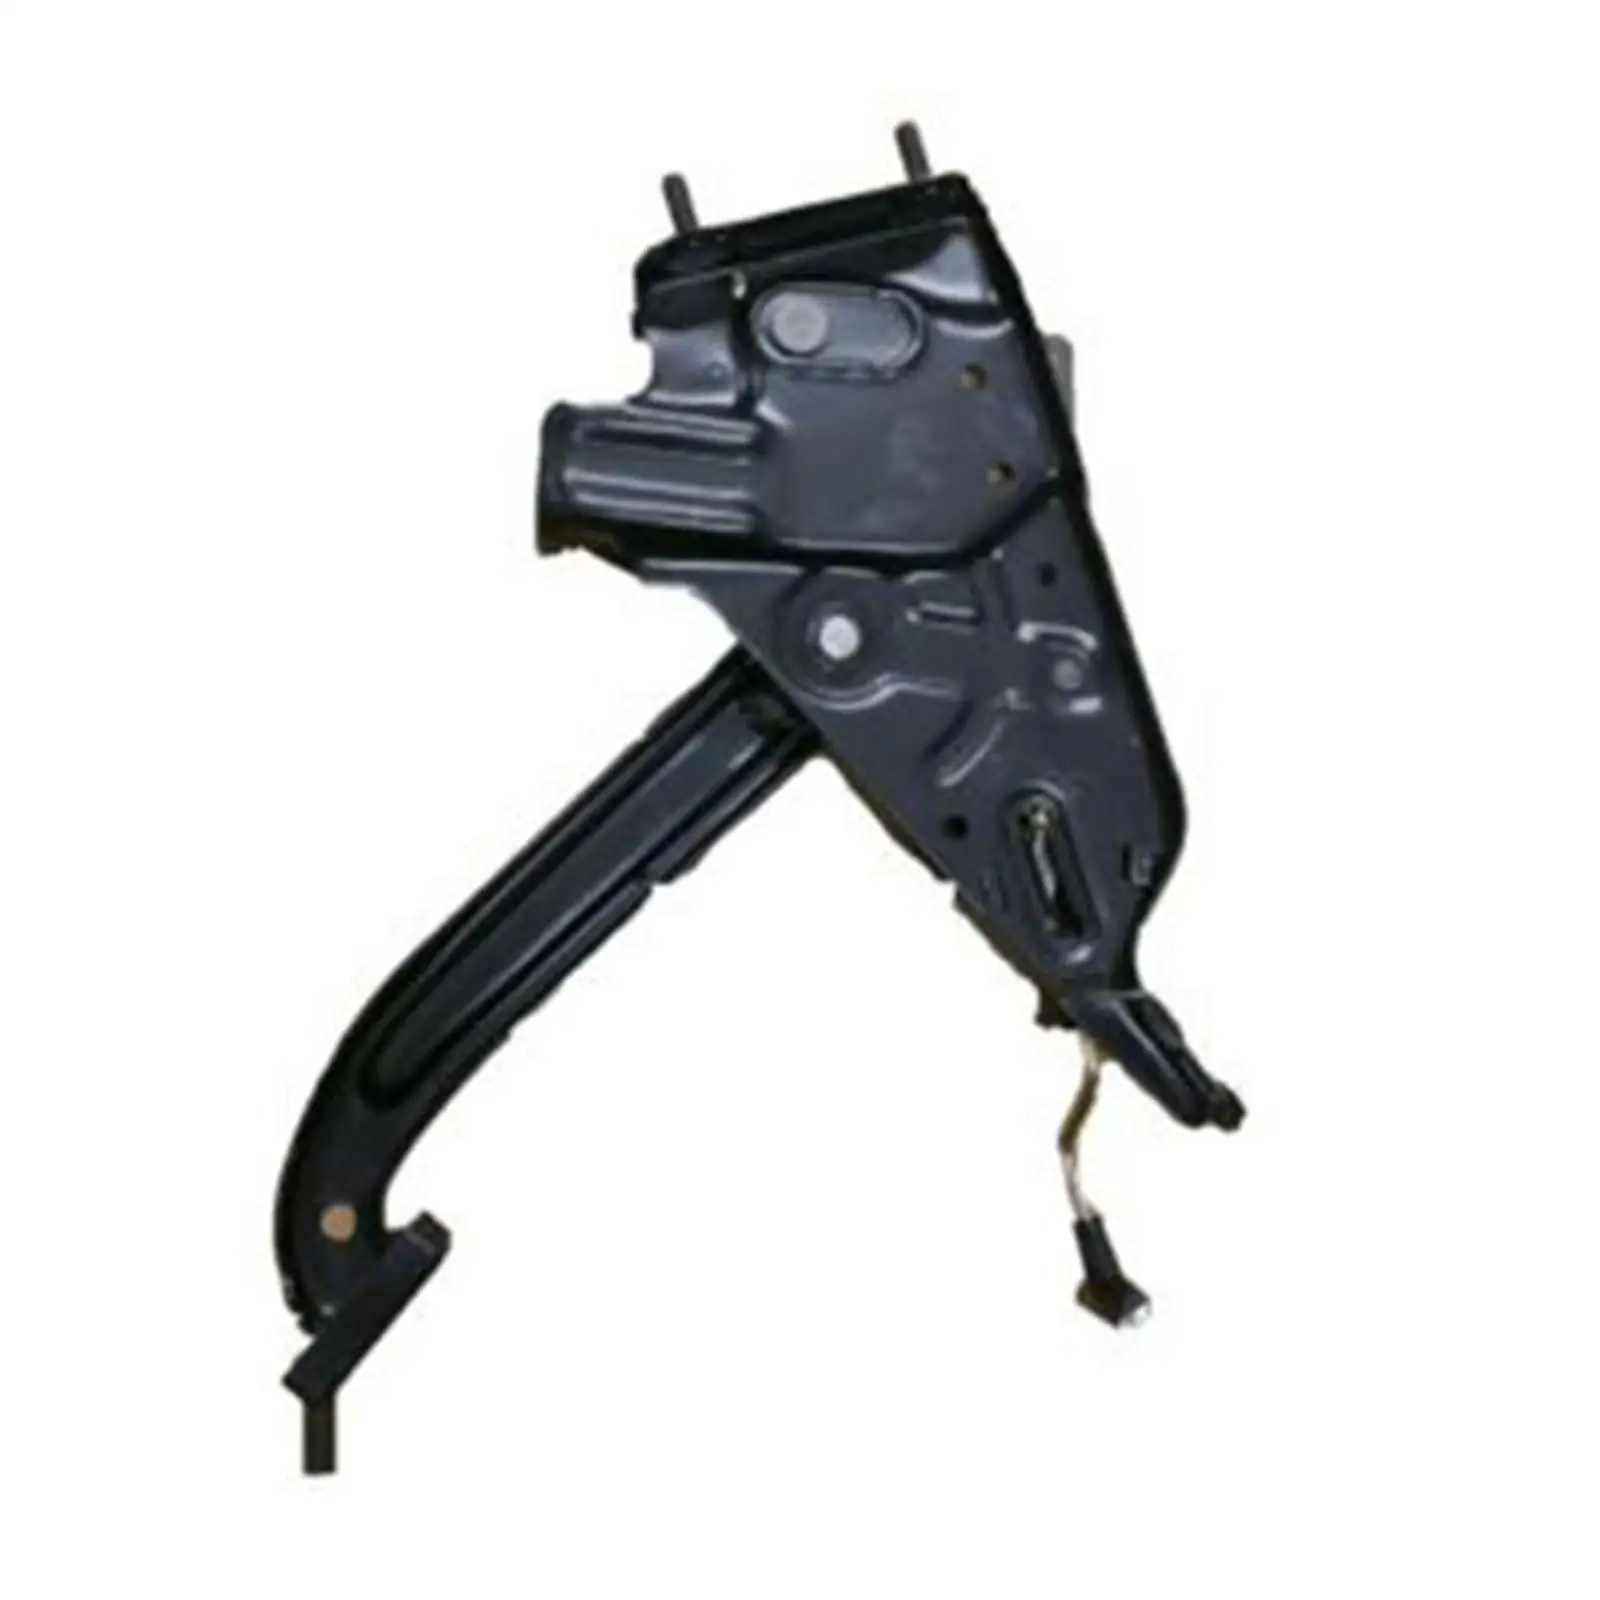 Parking Emergency Brake Pedal Assembly 52003176 05093656AA 5093656AA for Jeep Wrangler Yj CJ Easy Installation Replace